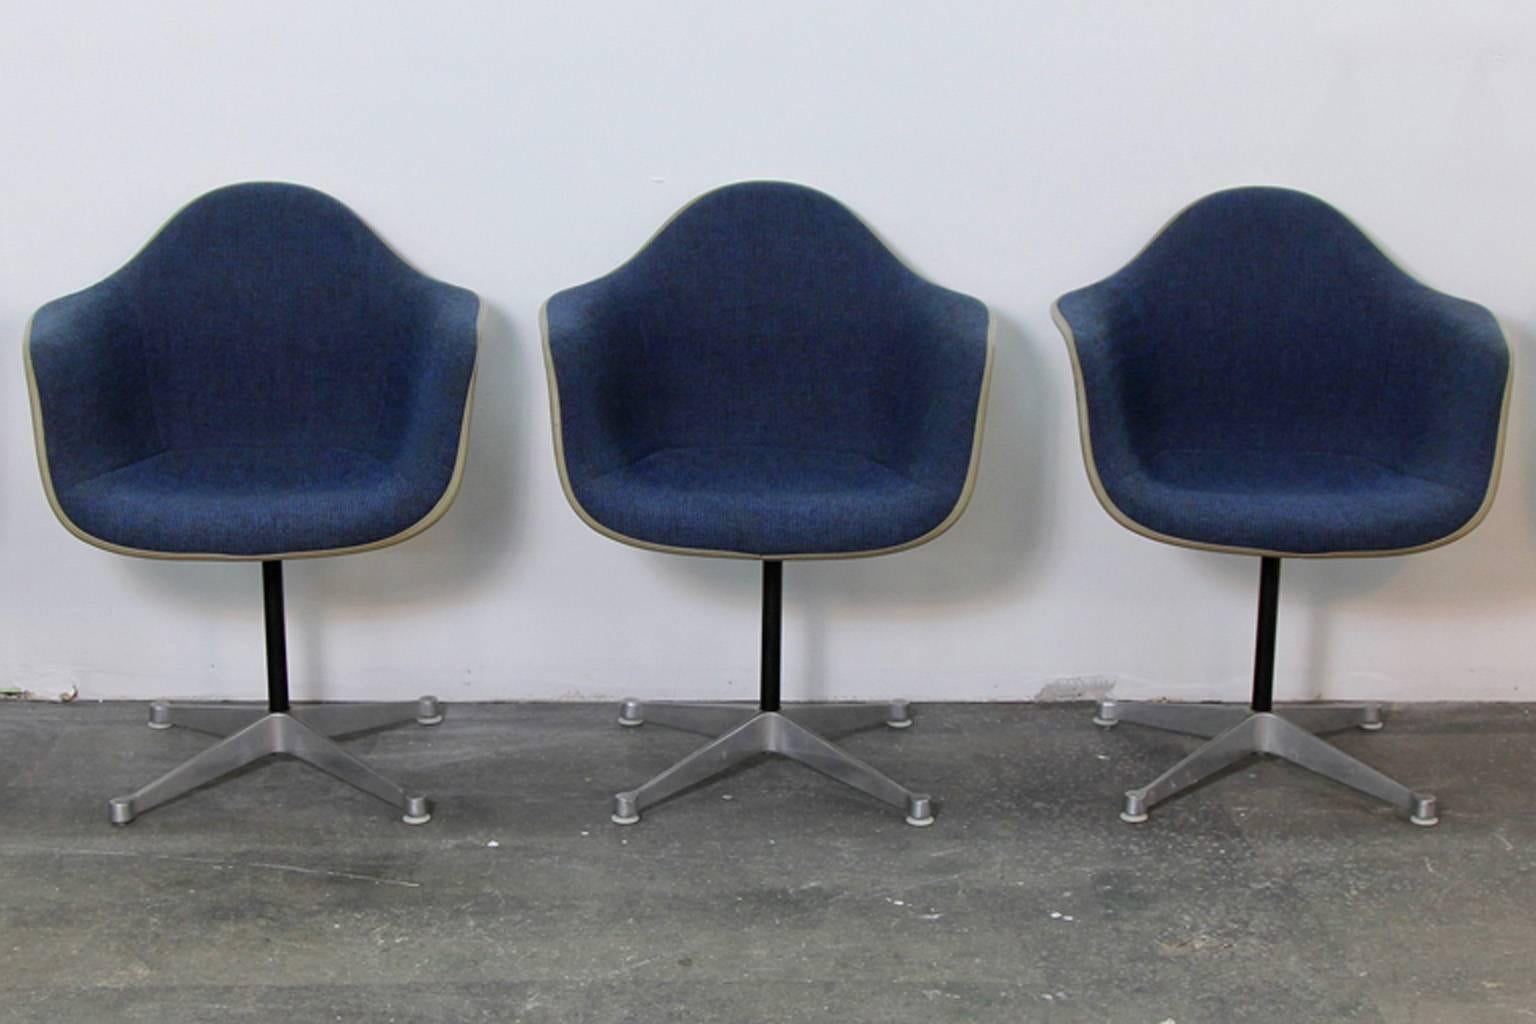 Incredible set of ten Herman Miller Shell chairs. All stamped Herman Miller, most with original upholstery tags. Navy woven fabric upholstery. On 4 Star swivel bases. In excellent condition with some light scratches commensurate with age. Upholstery